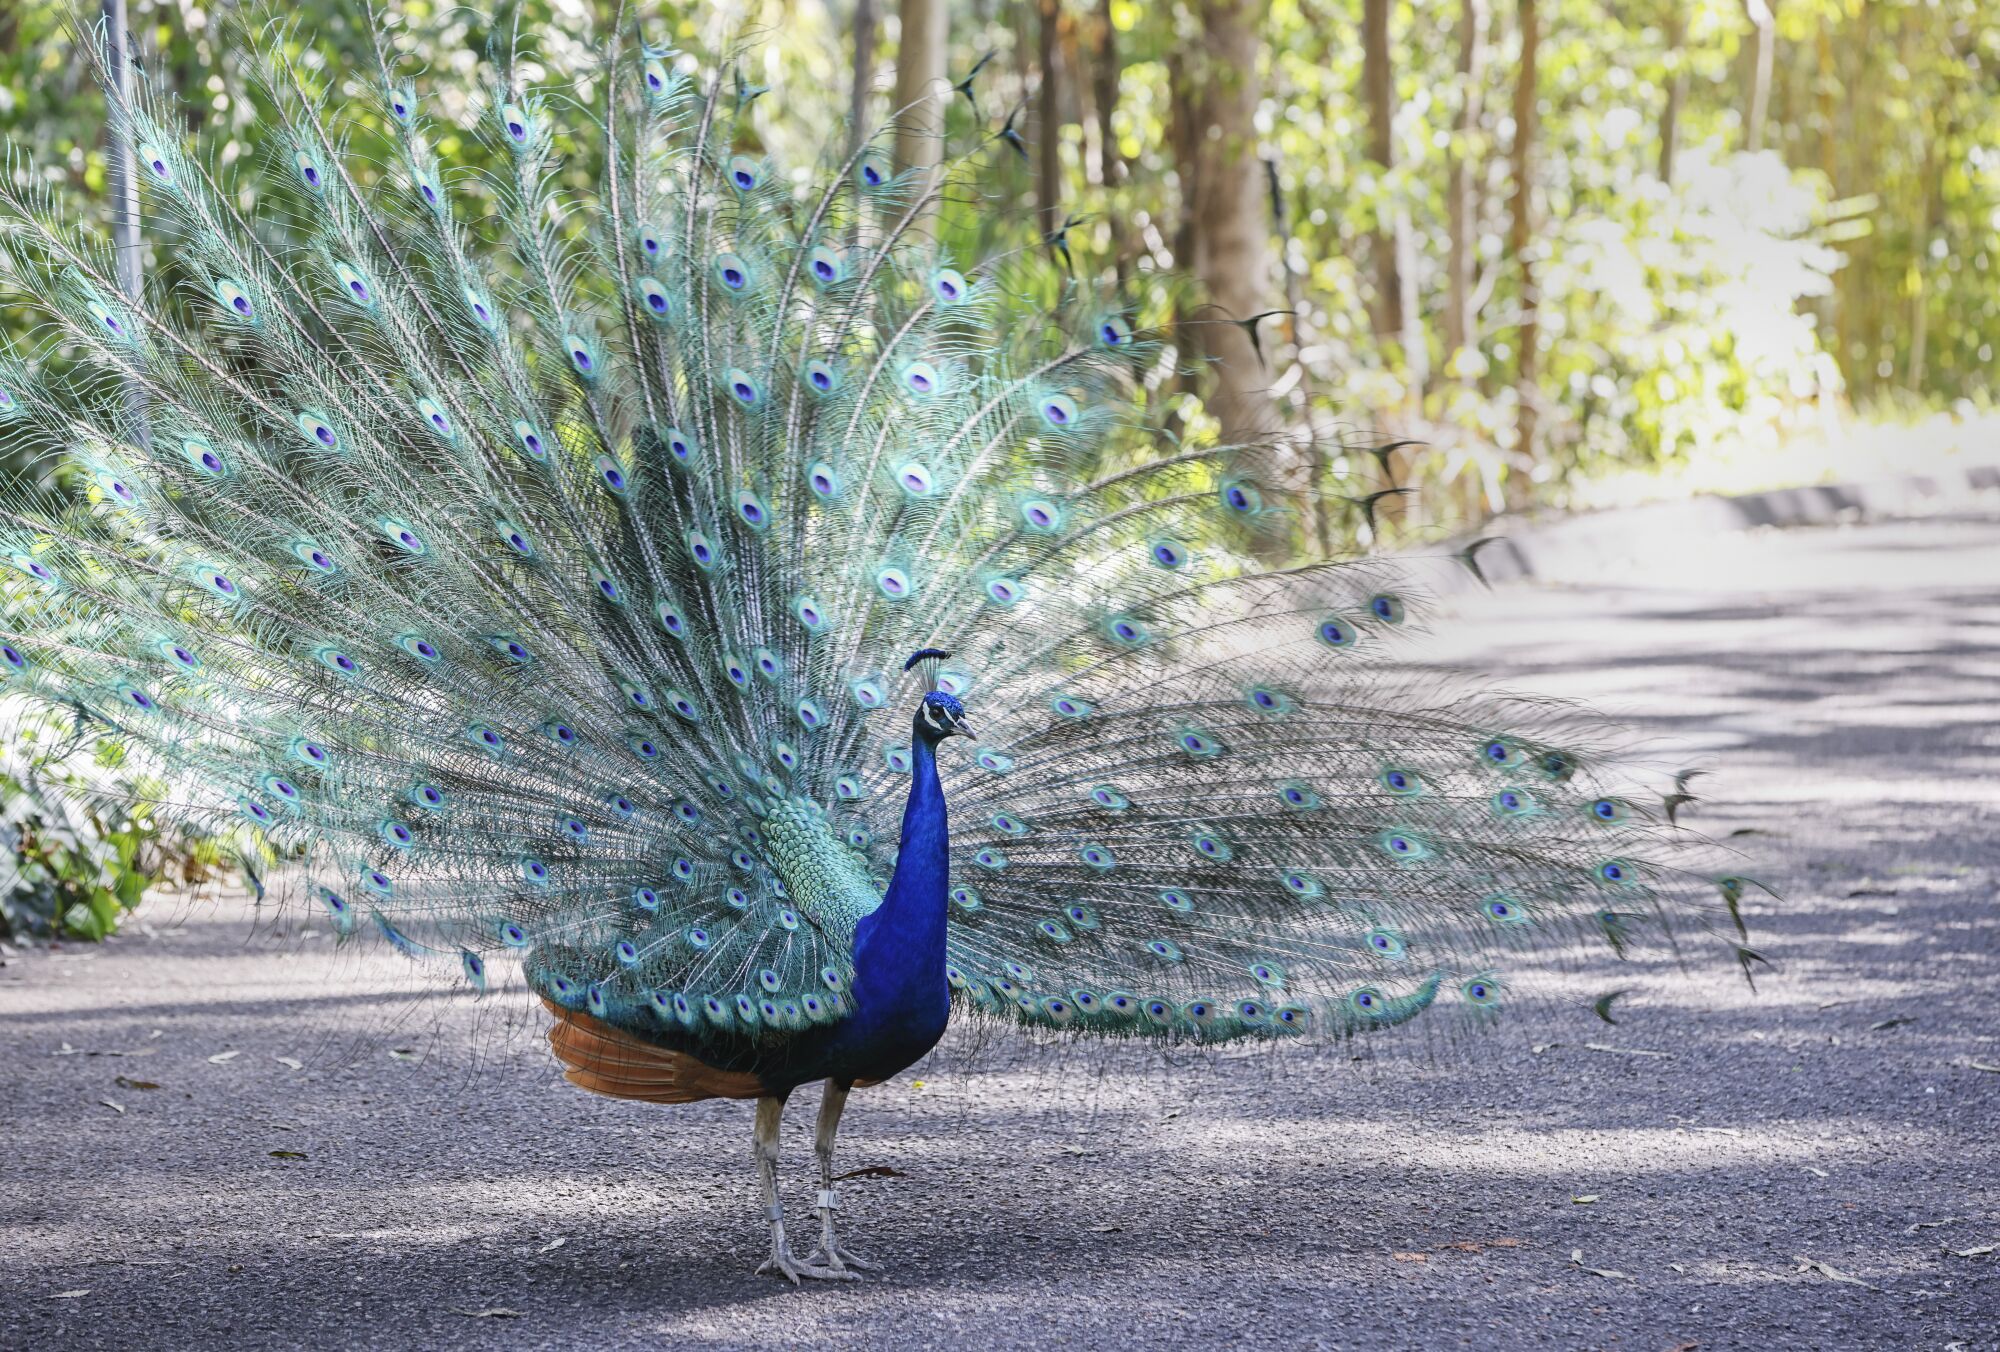 This is one of several peacocks that roam the grounds at the San Diego Zoo.